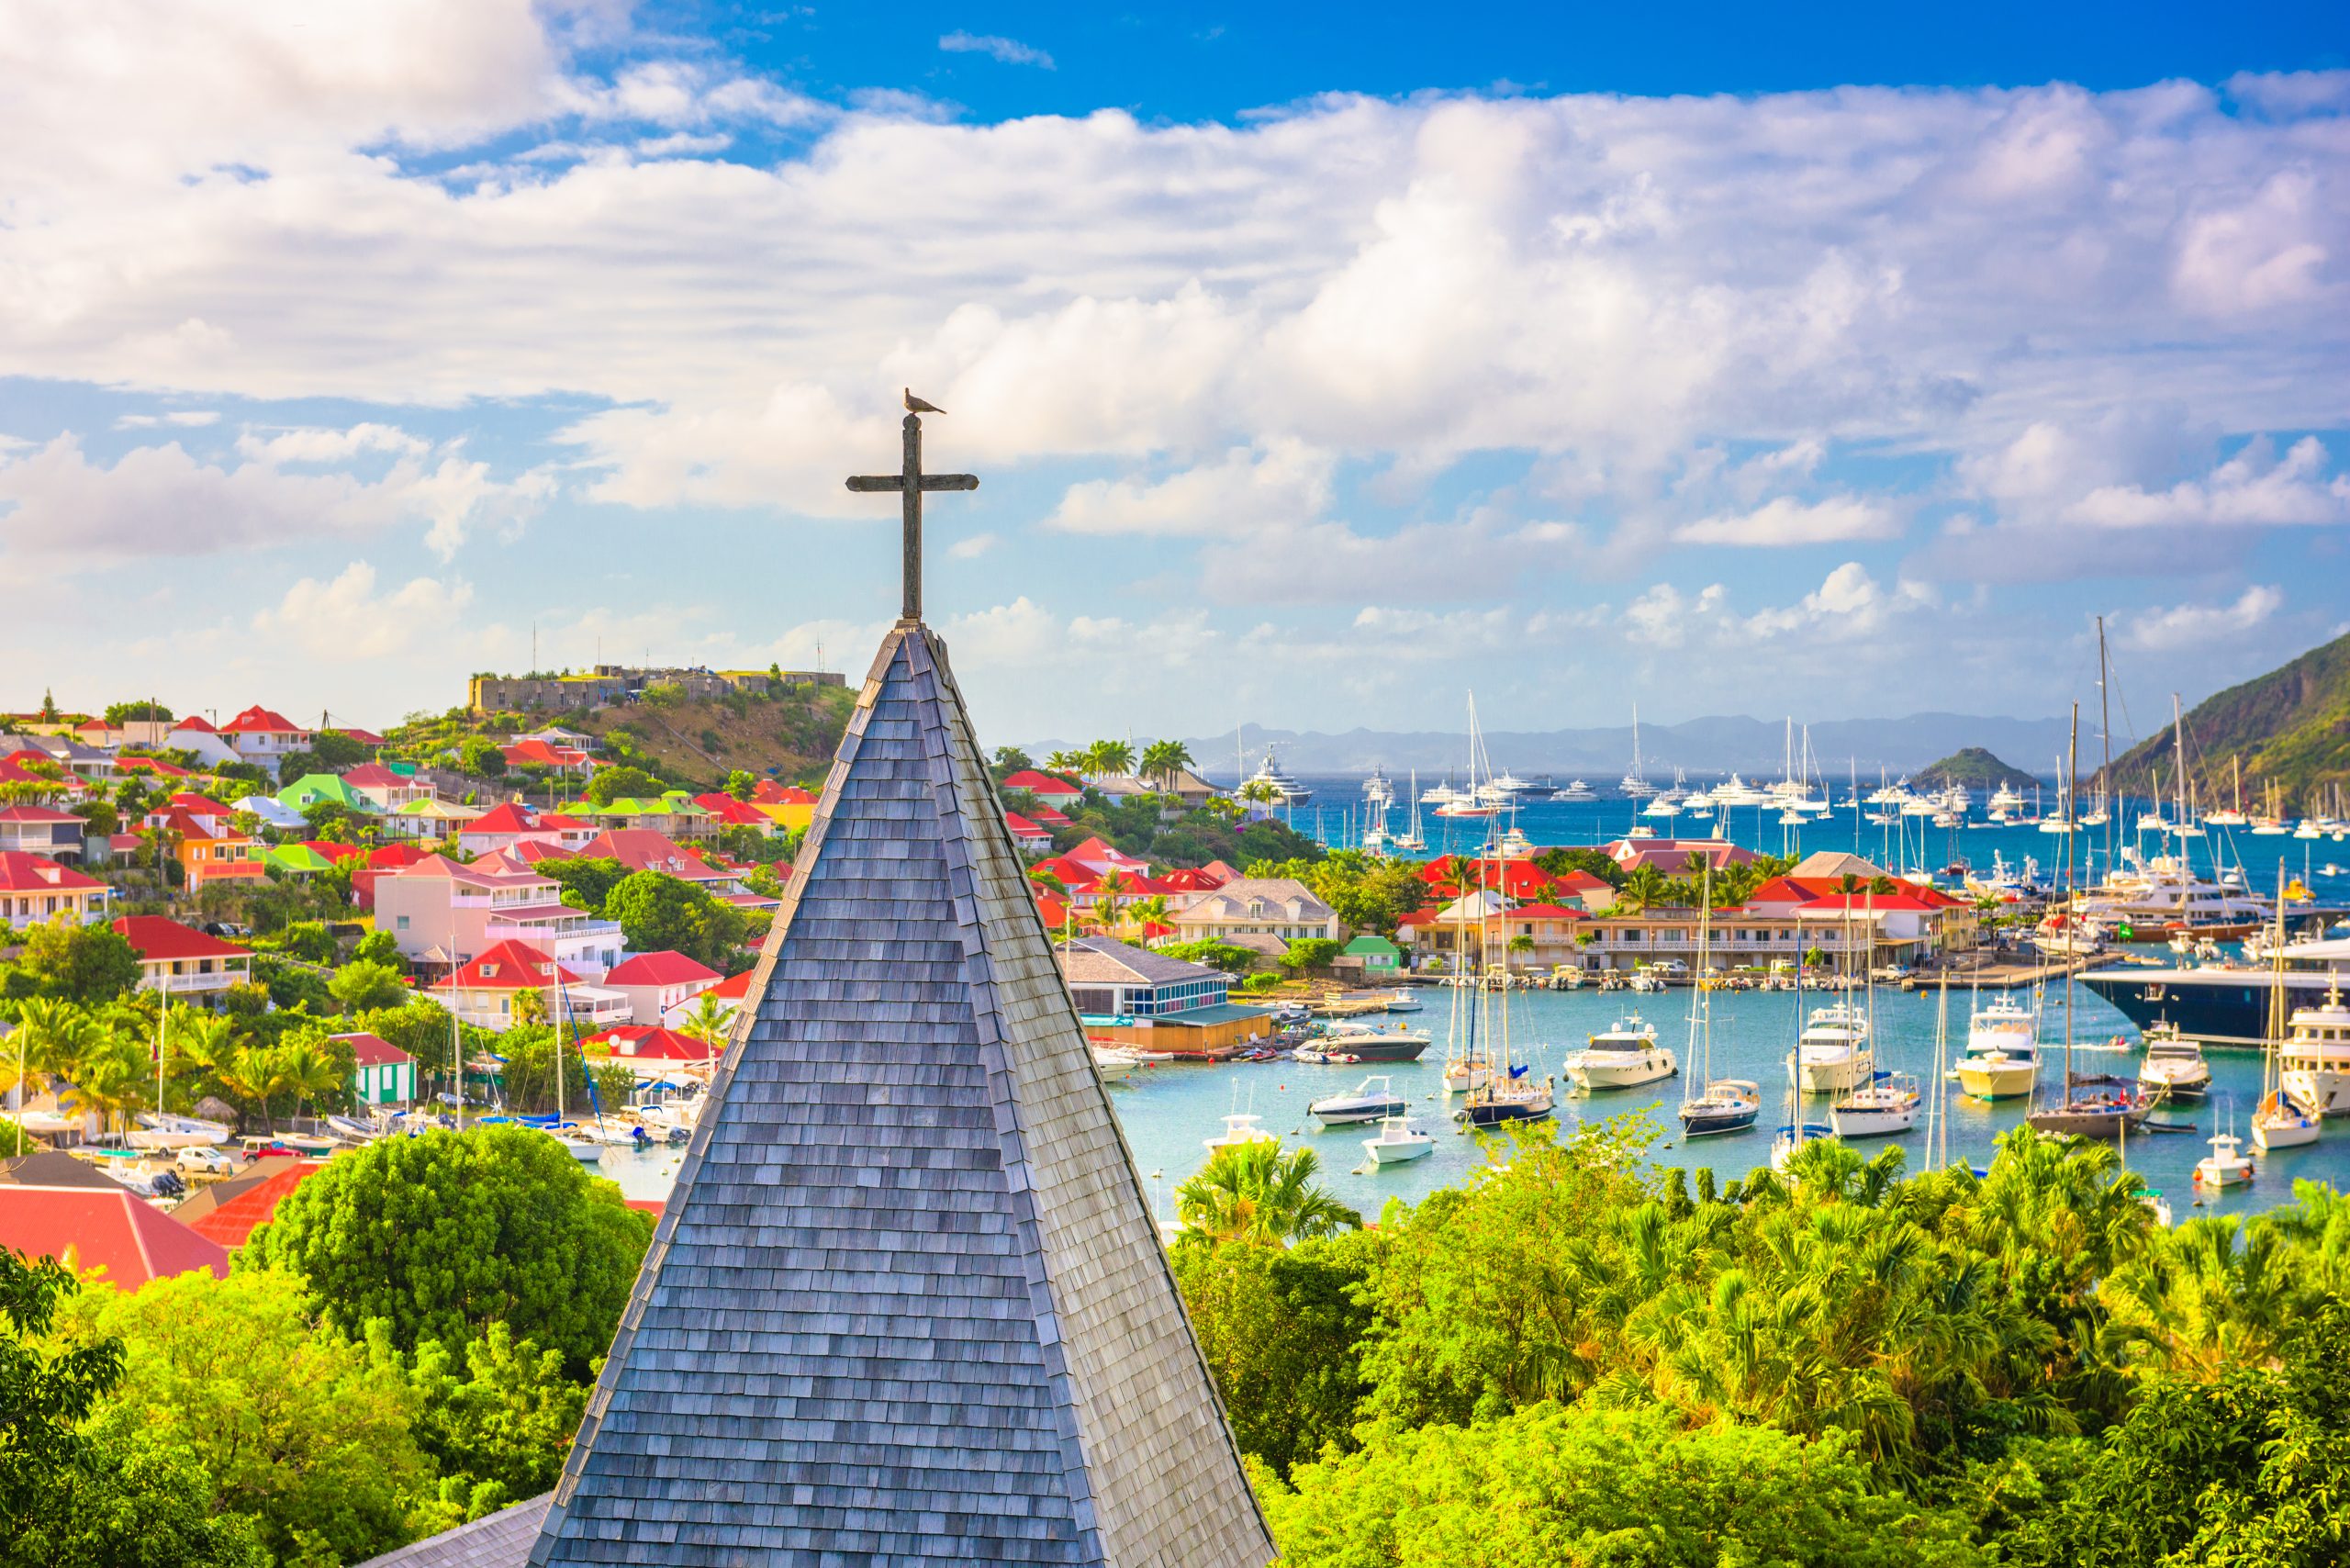 Best Weekend Getaways For Couples in the Caribbean